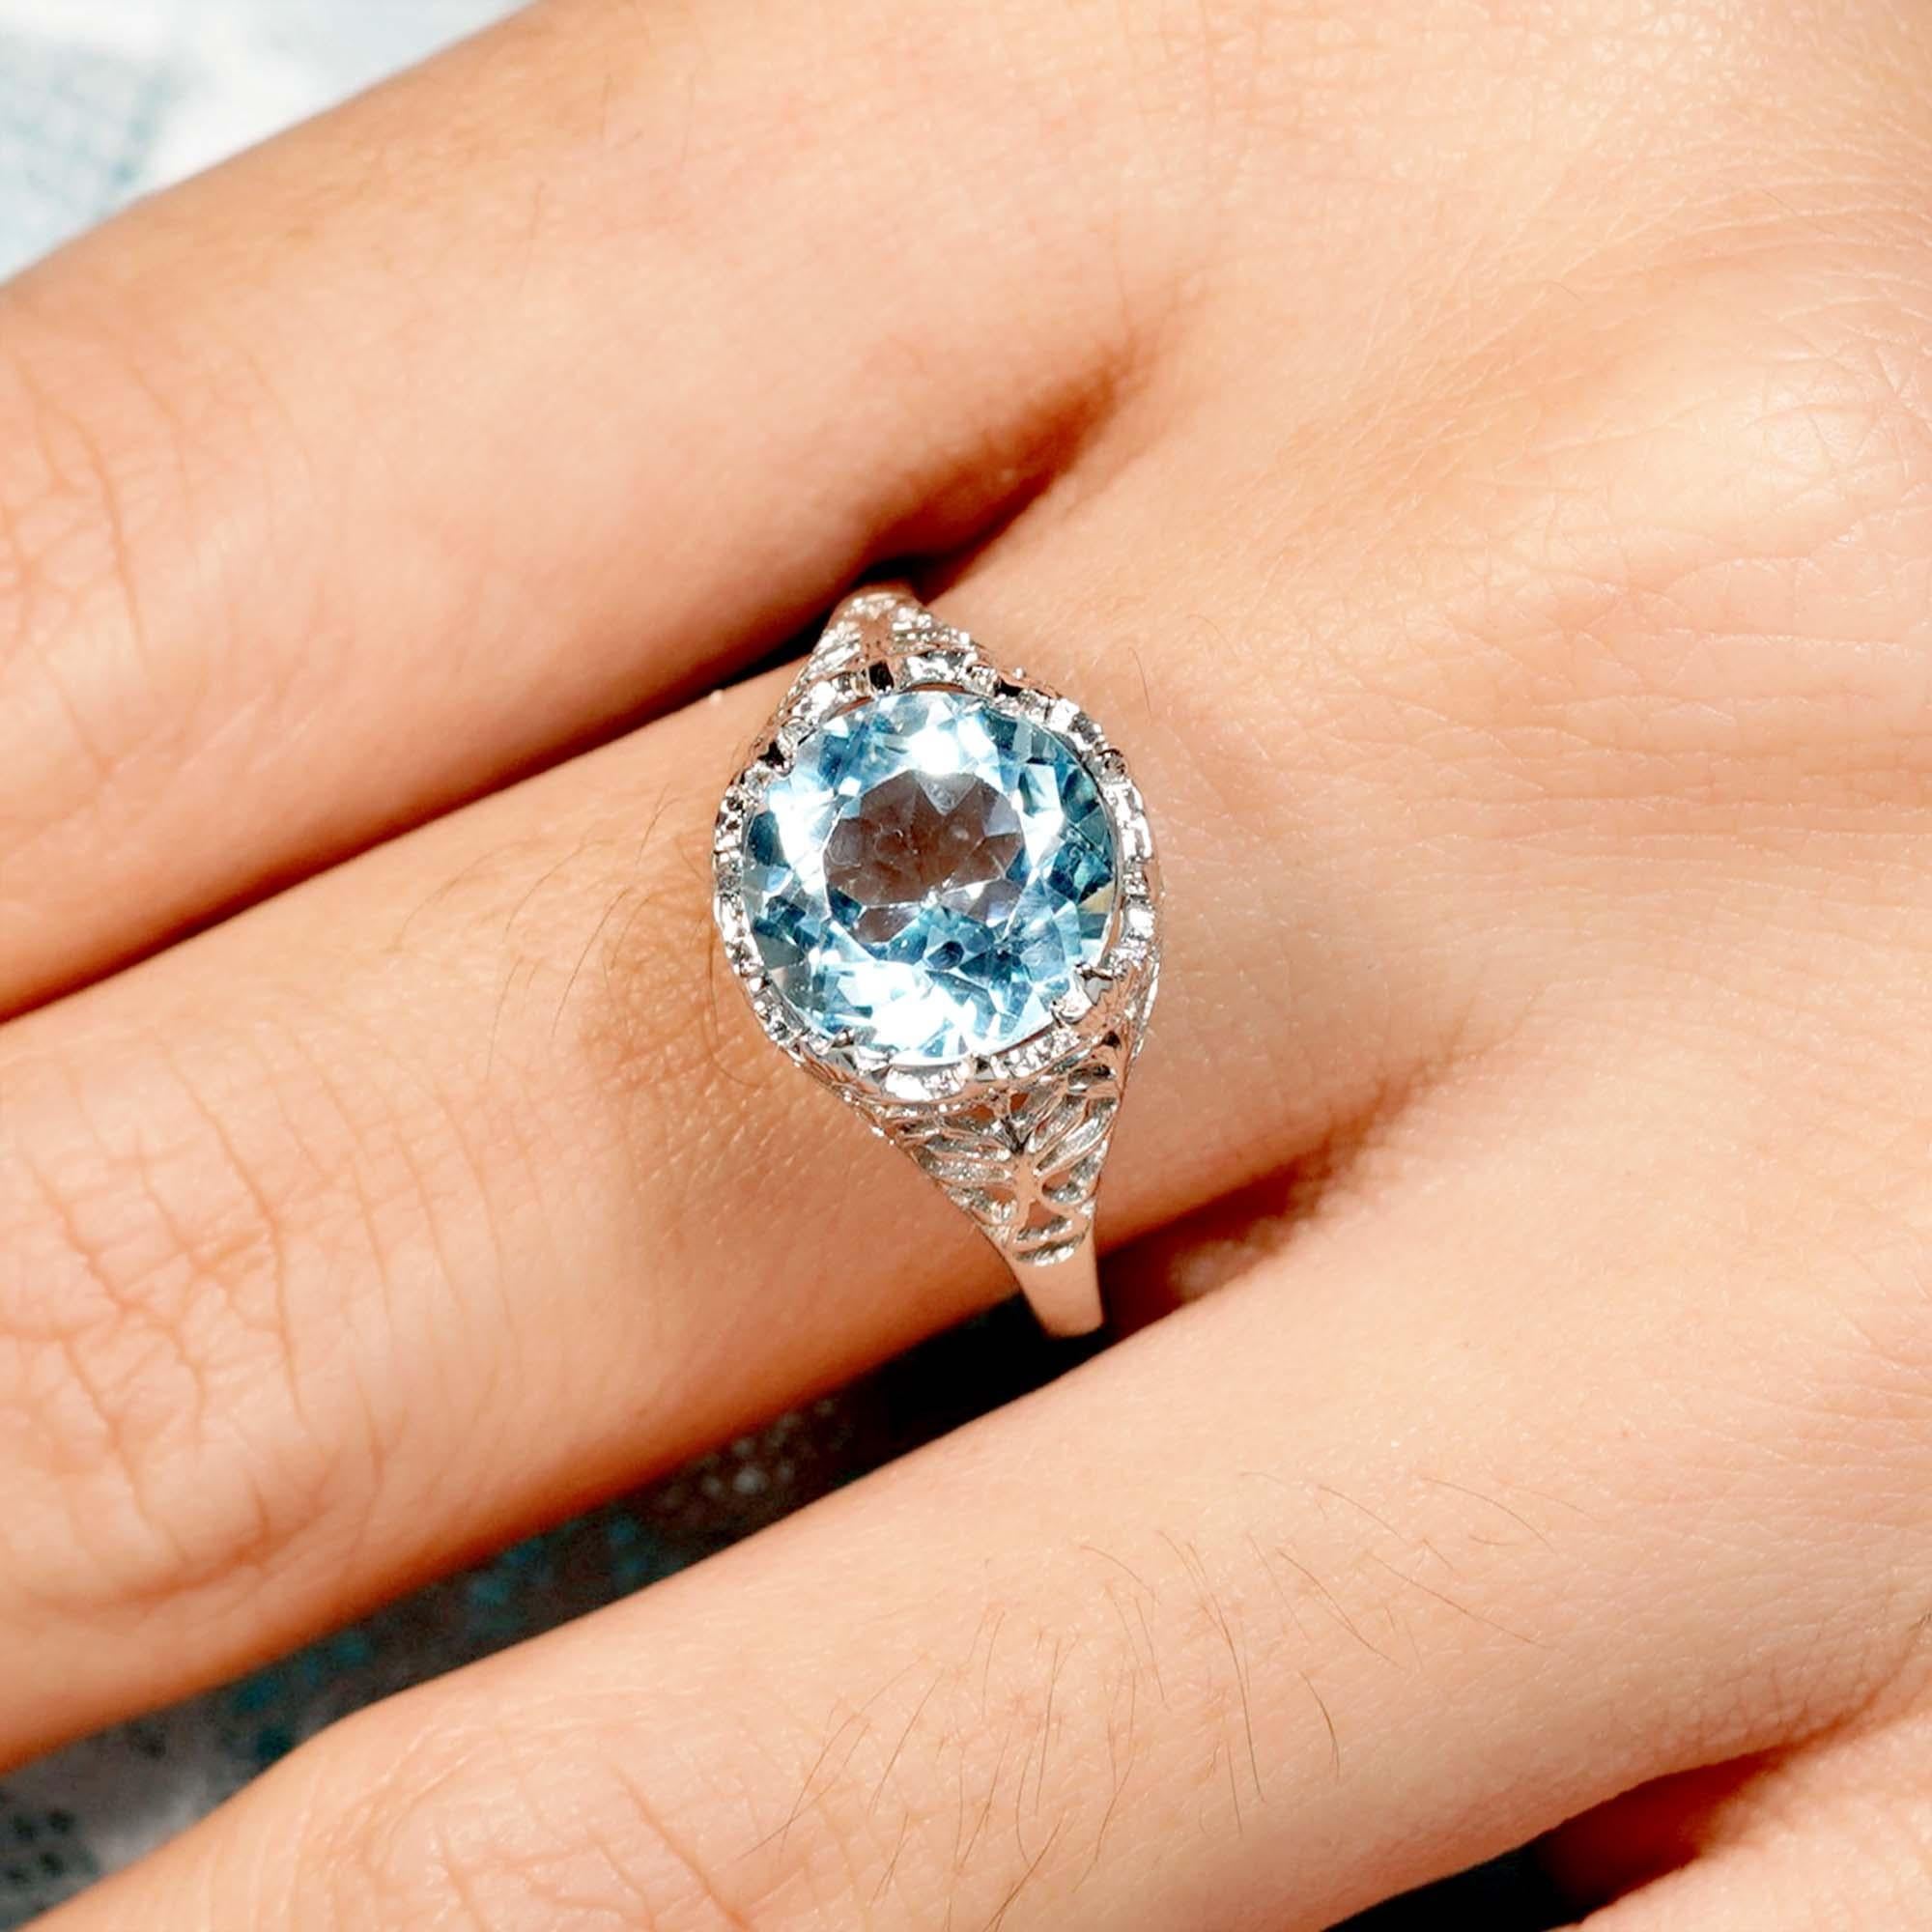 For Sale:  4.5 Ct. Natural Round Blue Topaz Vintage Style Ring in Solid 9K White Gold 8